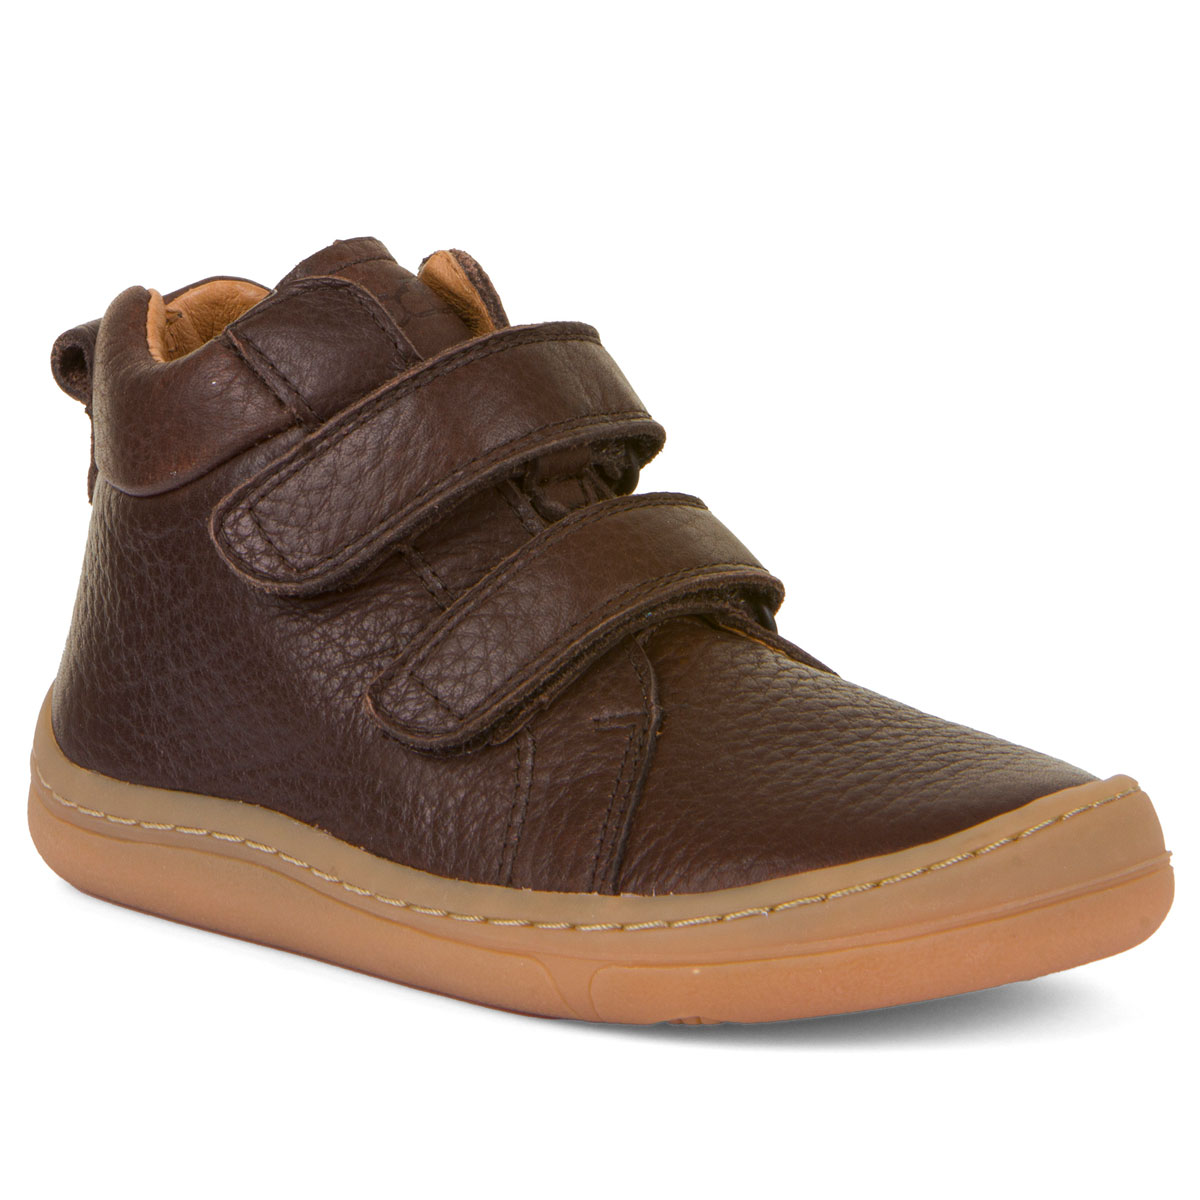 Barefoot High Tops brown